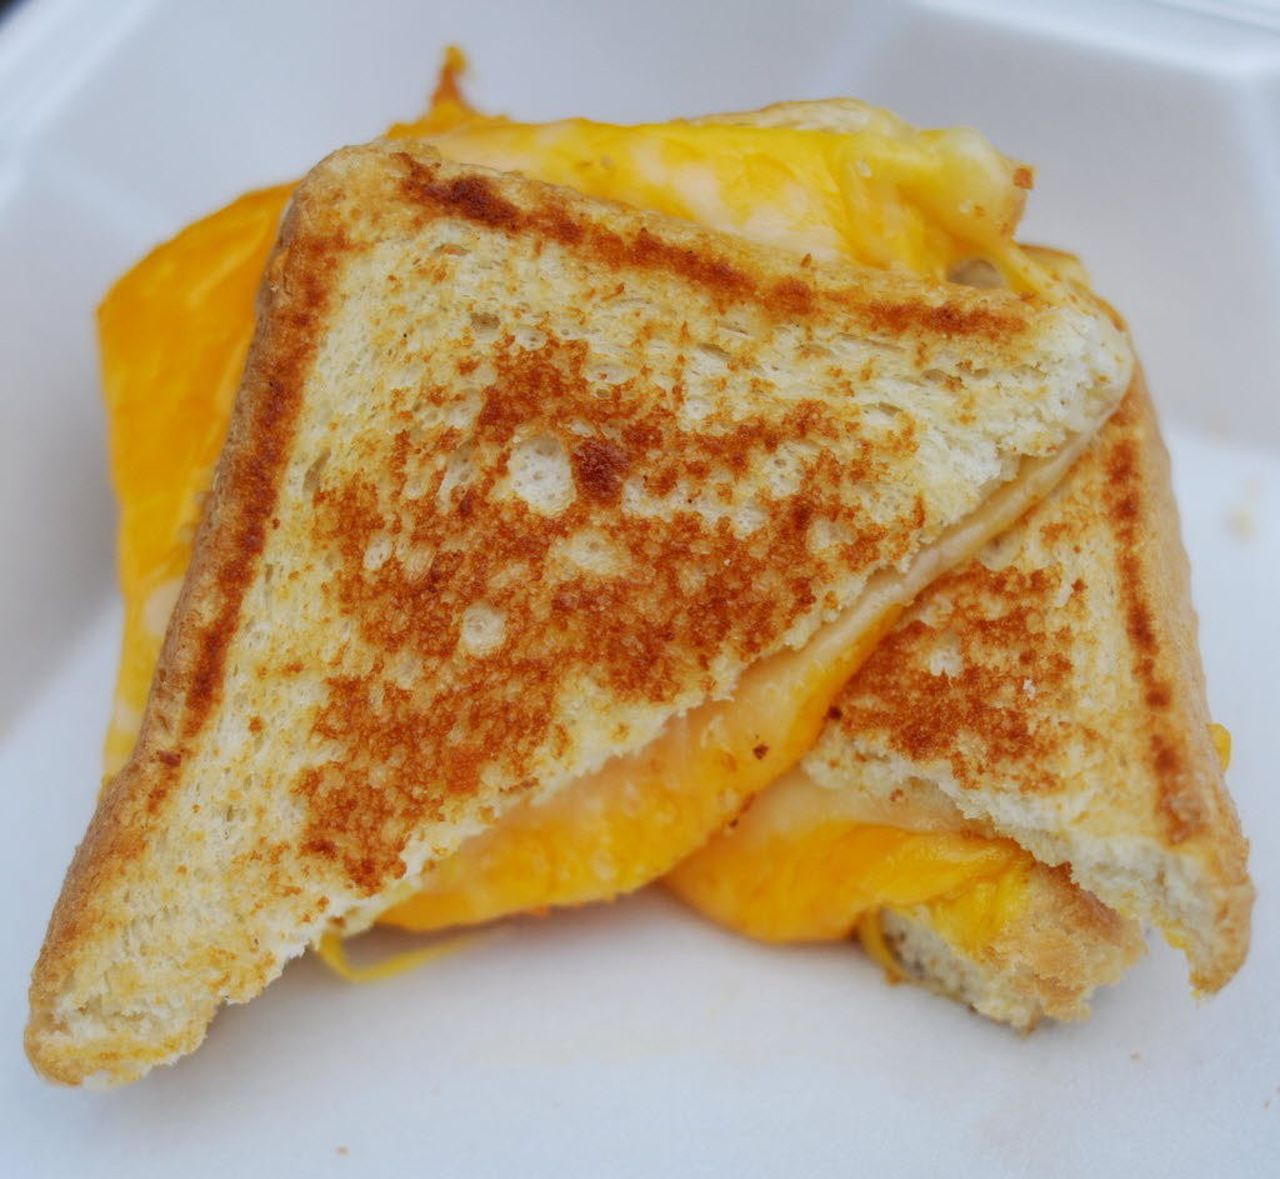 Where to celebrate National Grilled Cheese Day in Birmingham